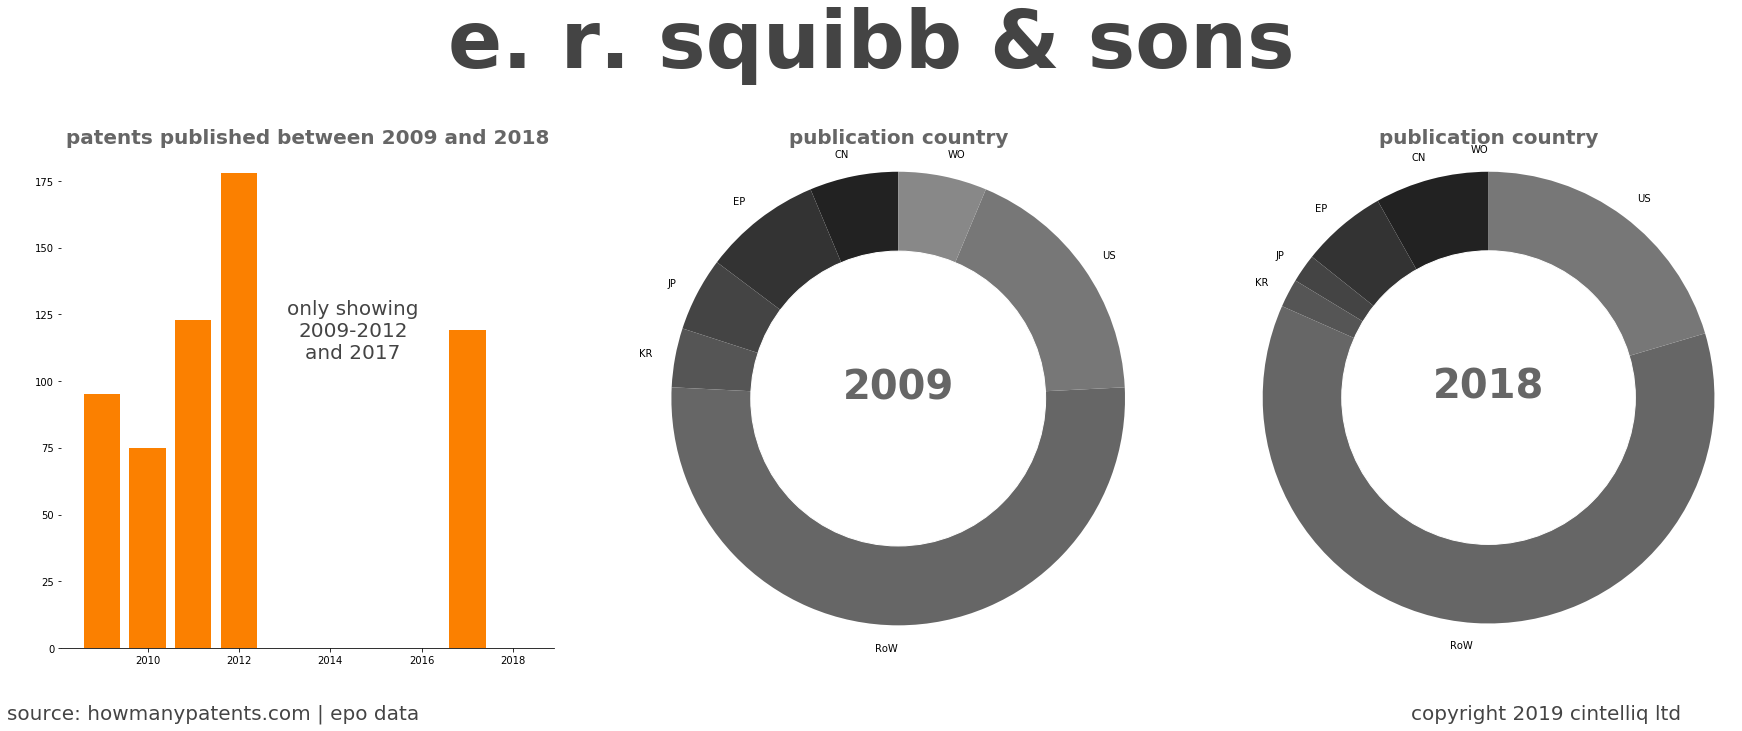 summary of patents for E. R. Squibb & Sons